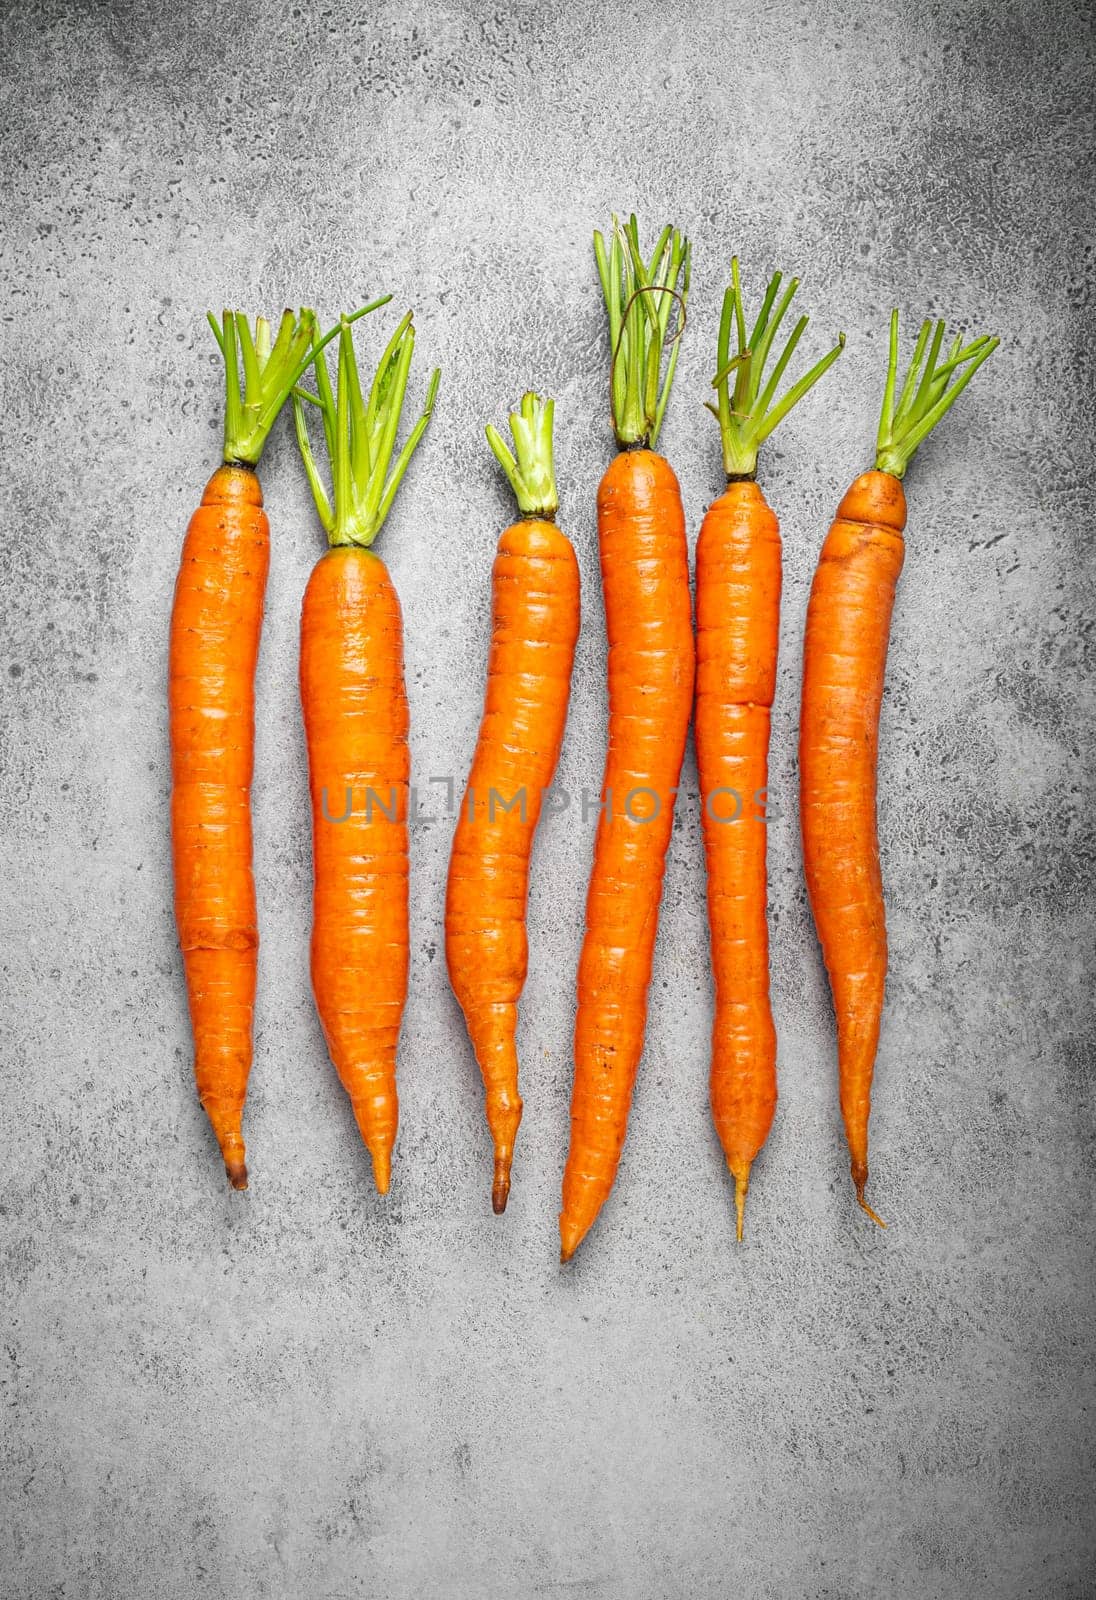 Fresh raw organic farm carrots with leafs arranged on grey rustic stone background top view, healthy carrots in balanced nutrition, cooking concept